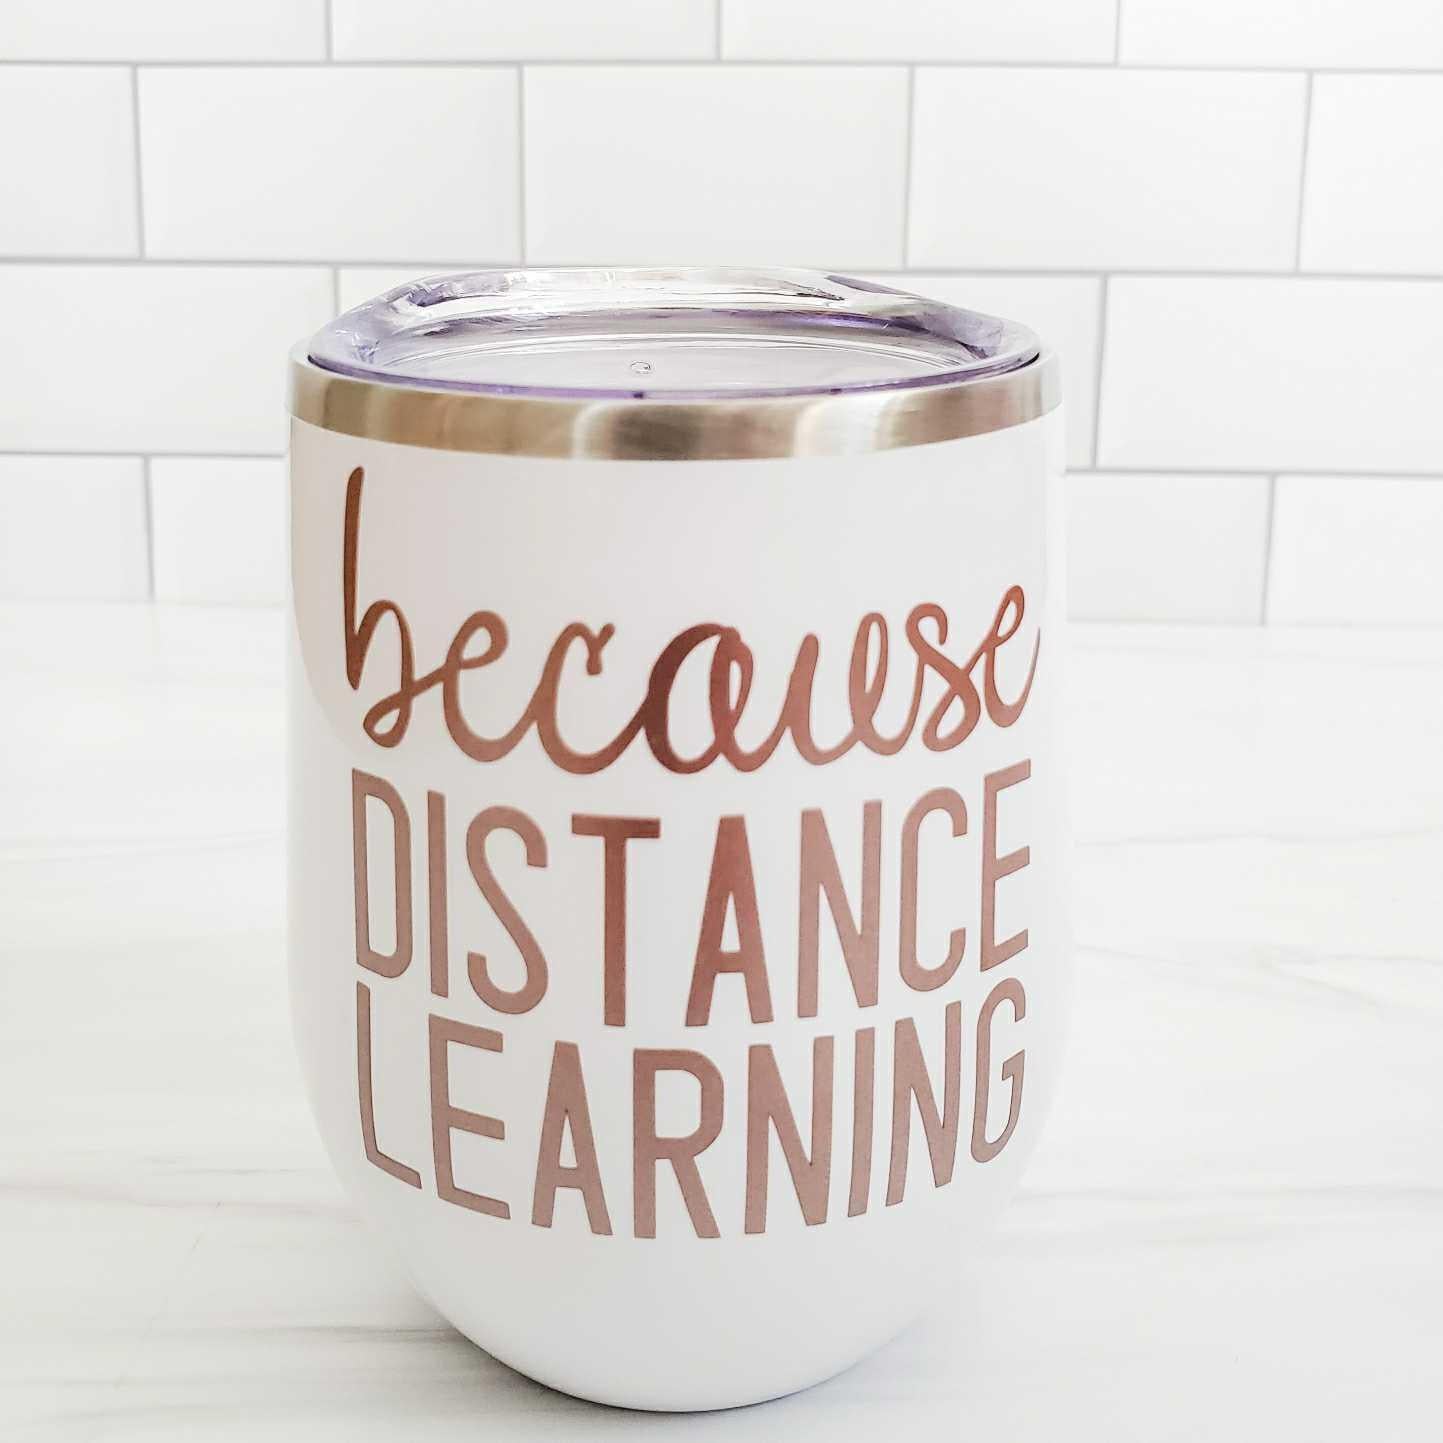 BECAUSE DISTANCE LEARNING Insulated Wine Tumbler Salt and Sparkle